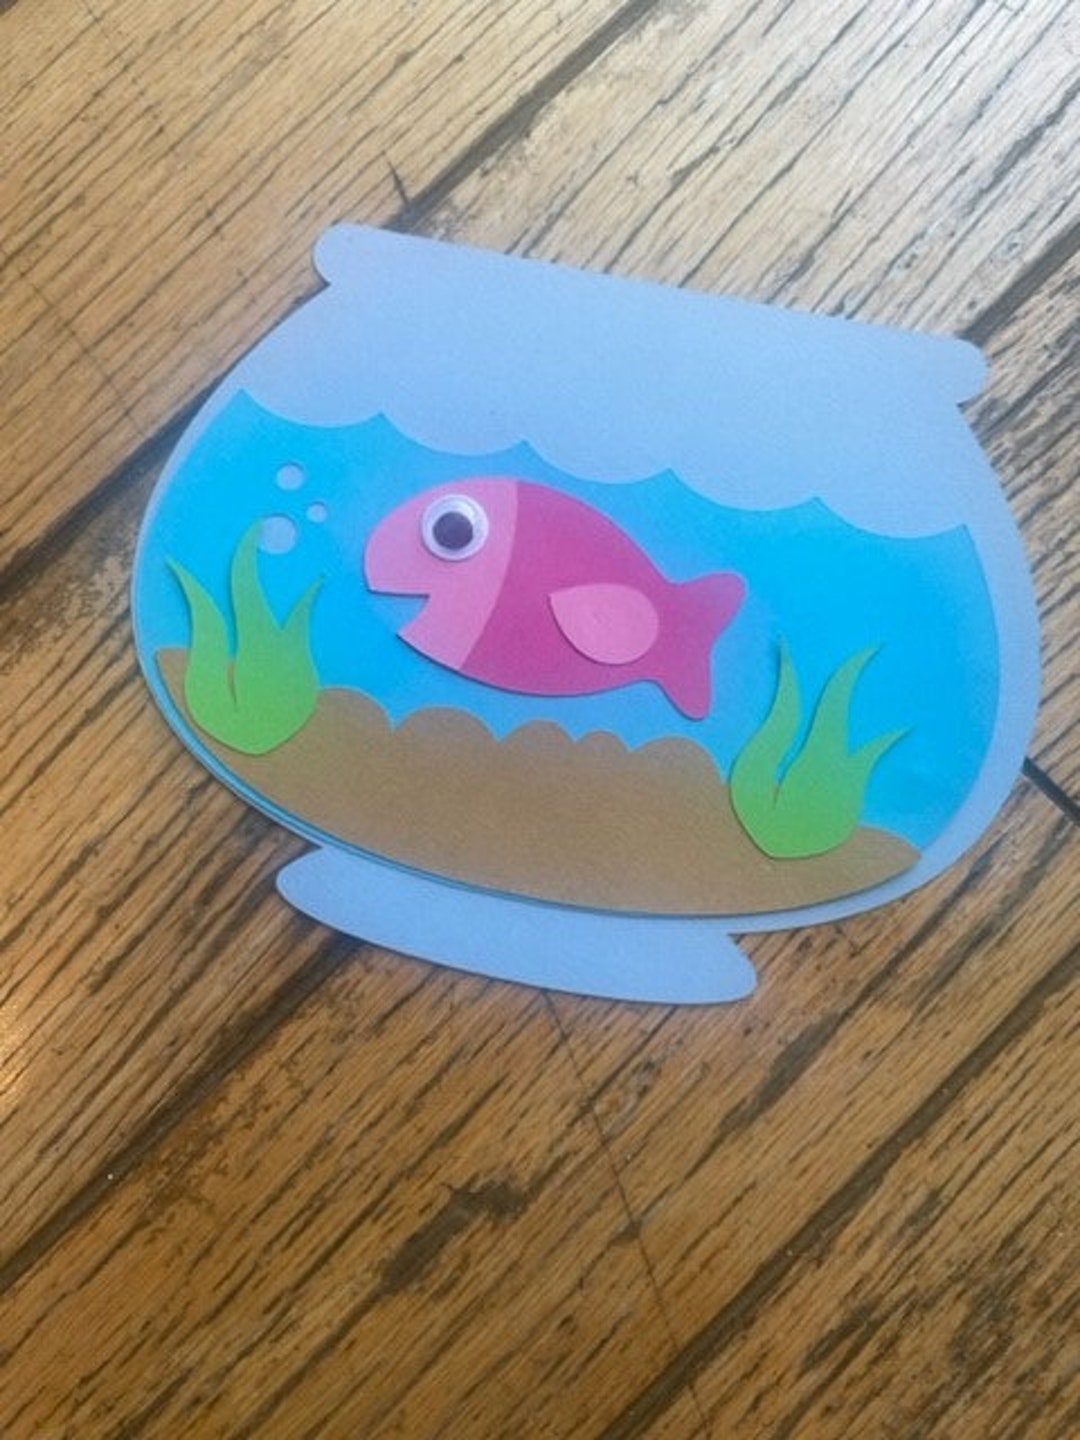 Paper Plate Fish Bowl Craft for Kids - 5 Minutes for Mom